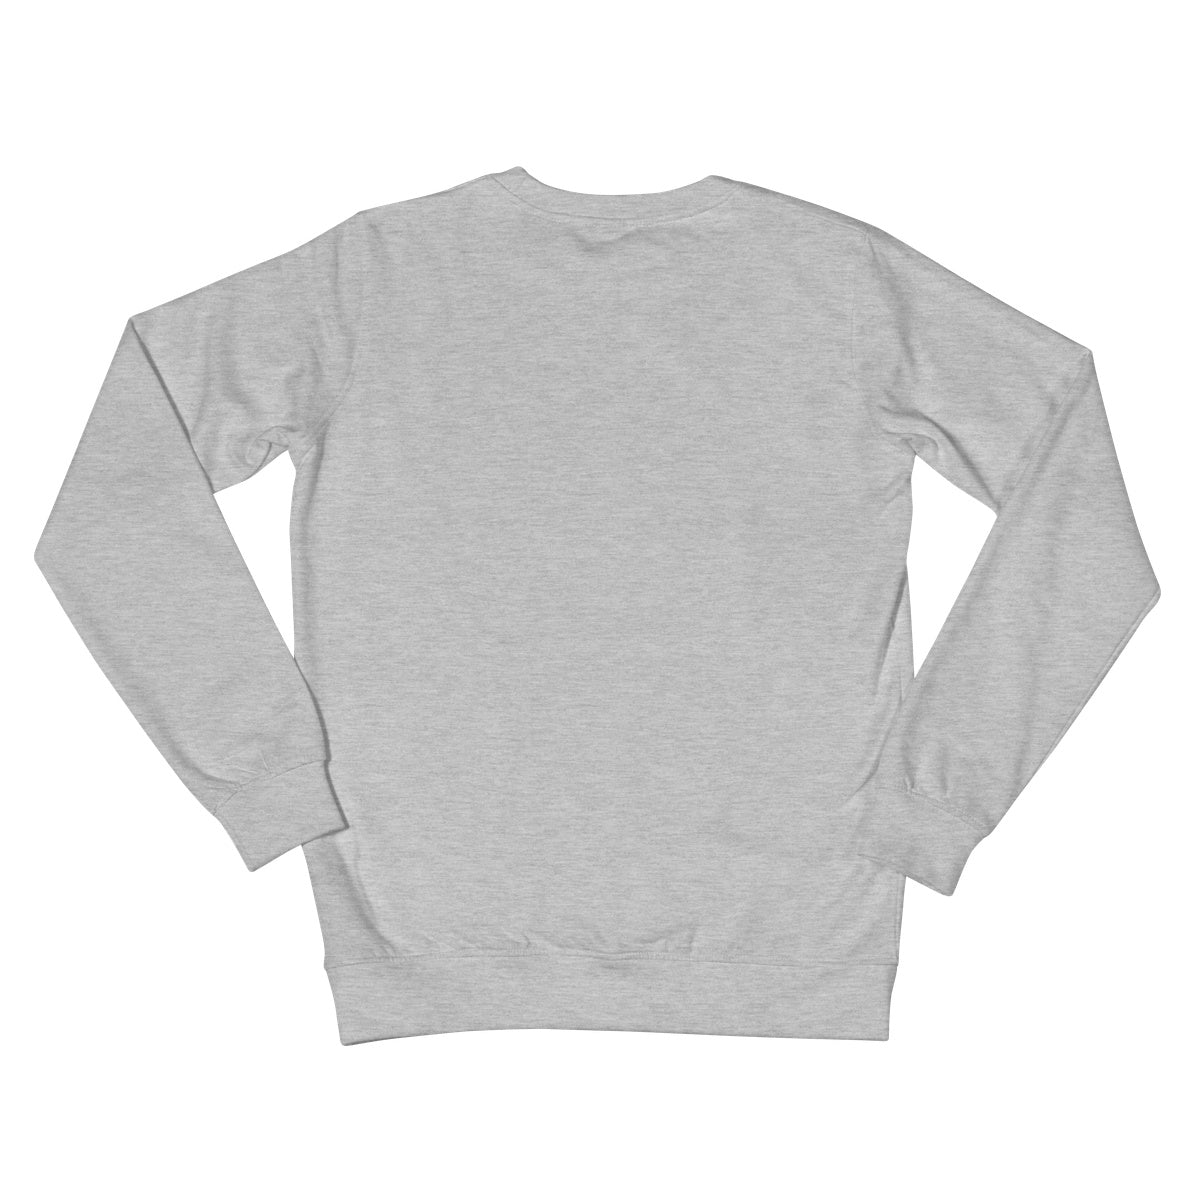 West Country Concertina Players Sweatshirt